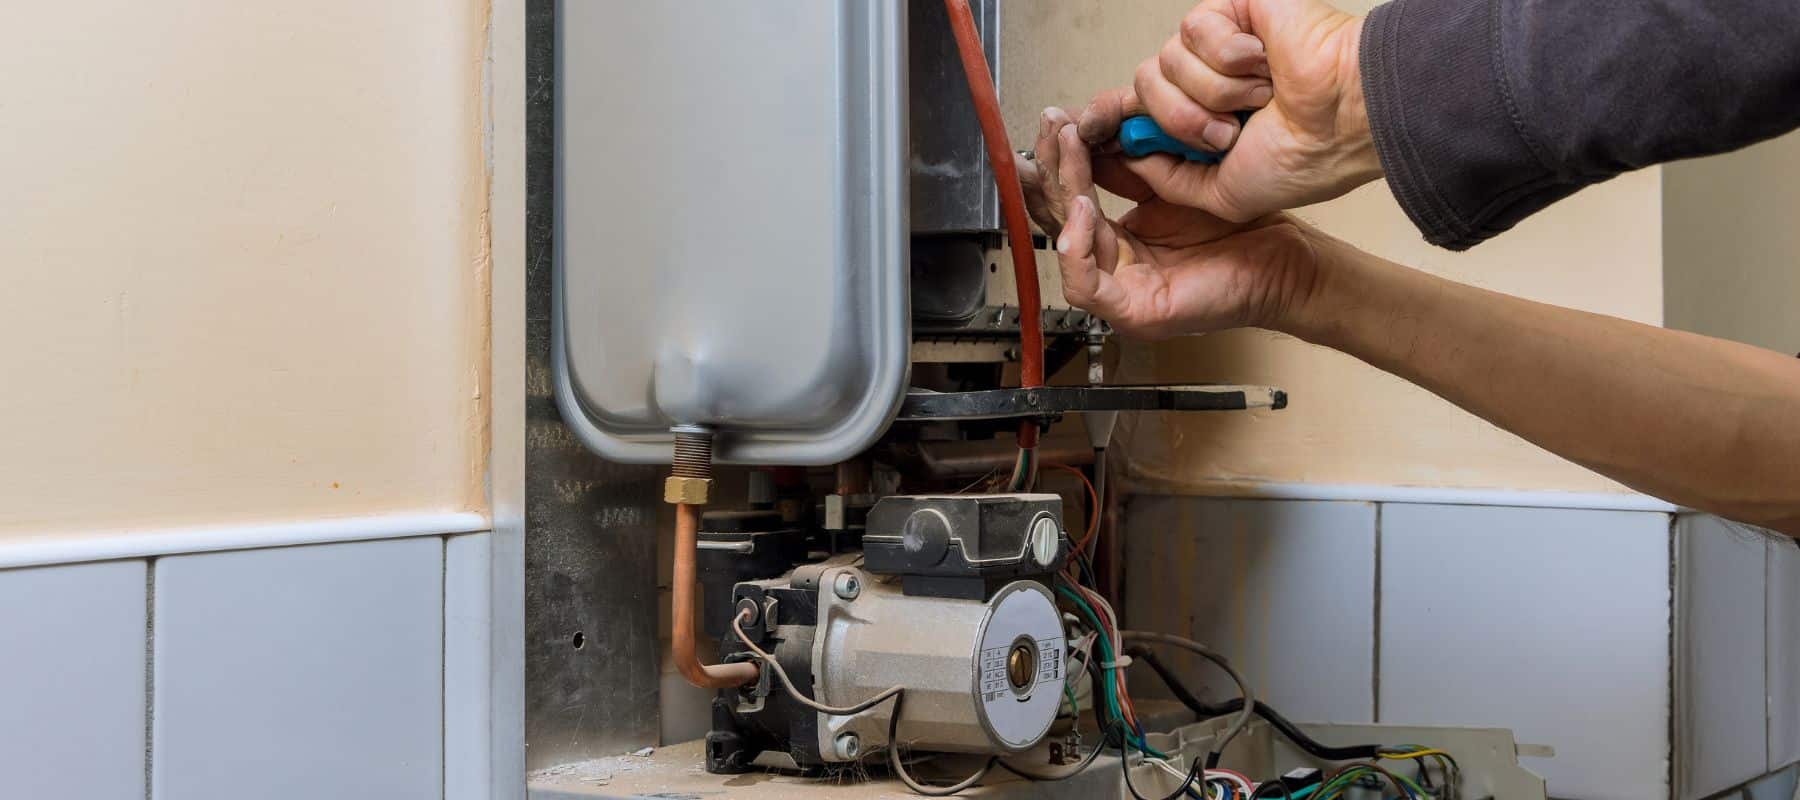 A person is servicing a boiler or water heater, visible by their hands using a screwdriver to adjust components within the lower service panel. The complexity of the machinery, with various wires and pipes, suggests technical expertise is required for the task. The maintenance work is being performed in a domestic setting, indicated by the tiled wall and flooring